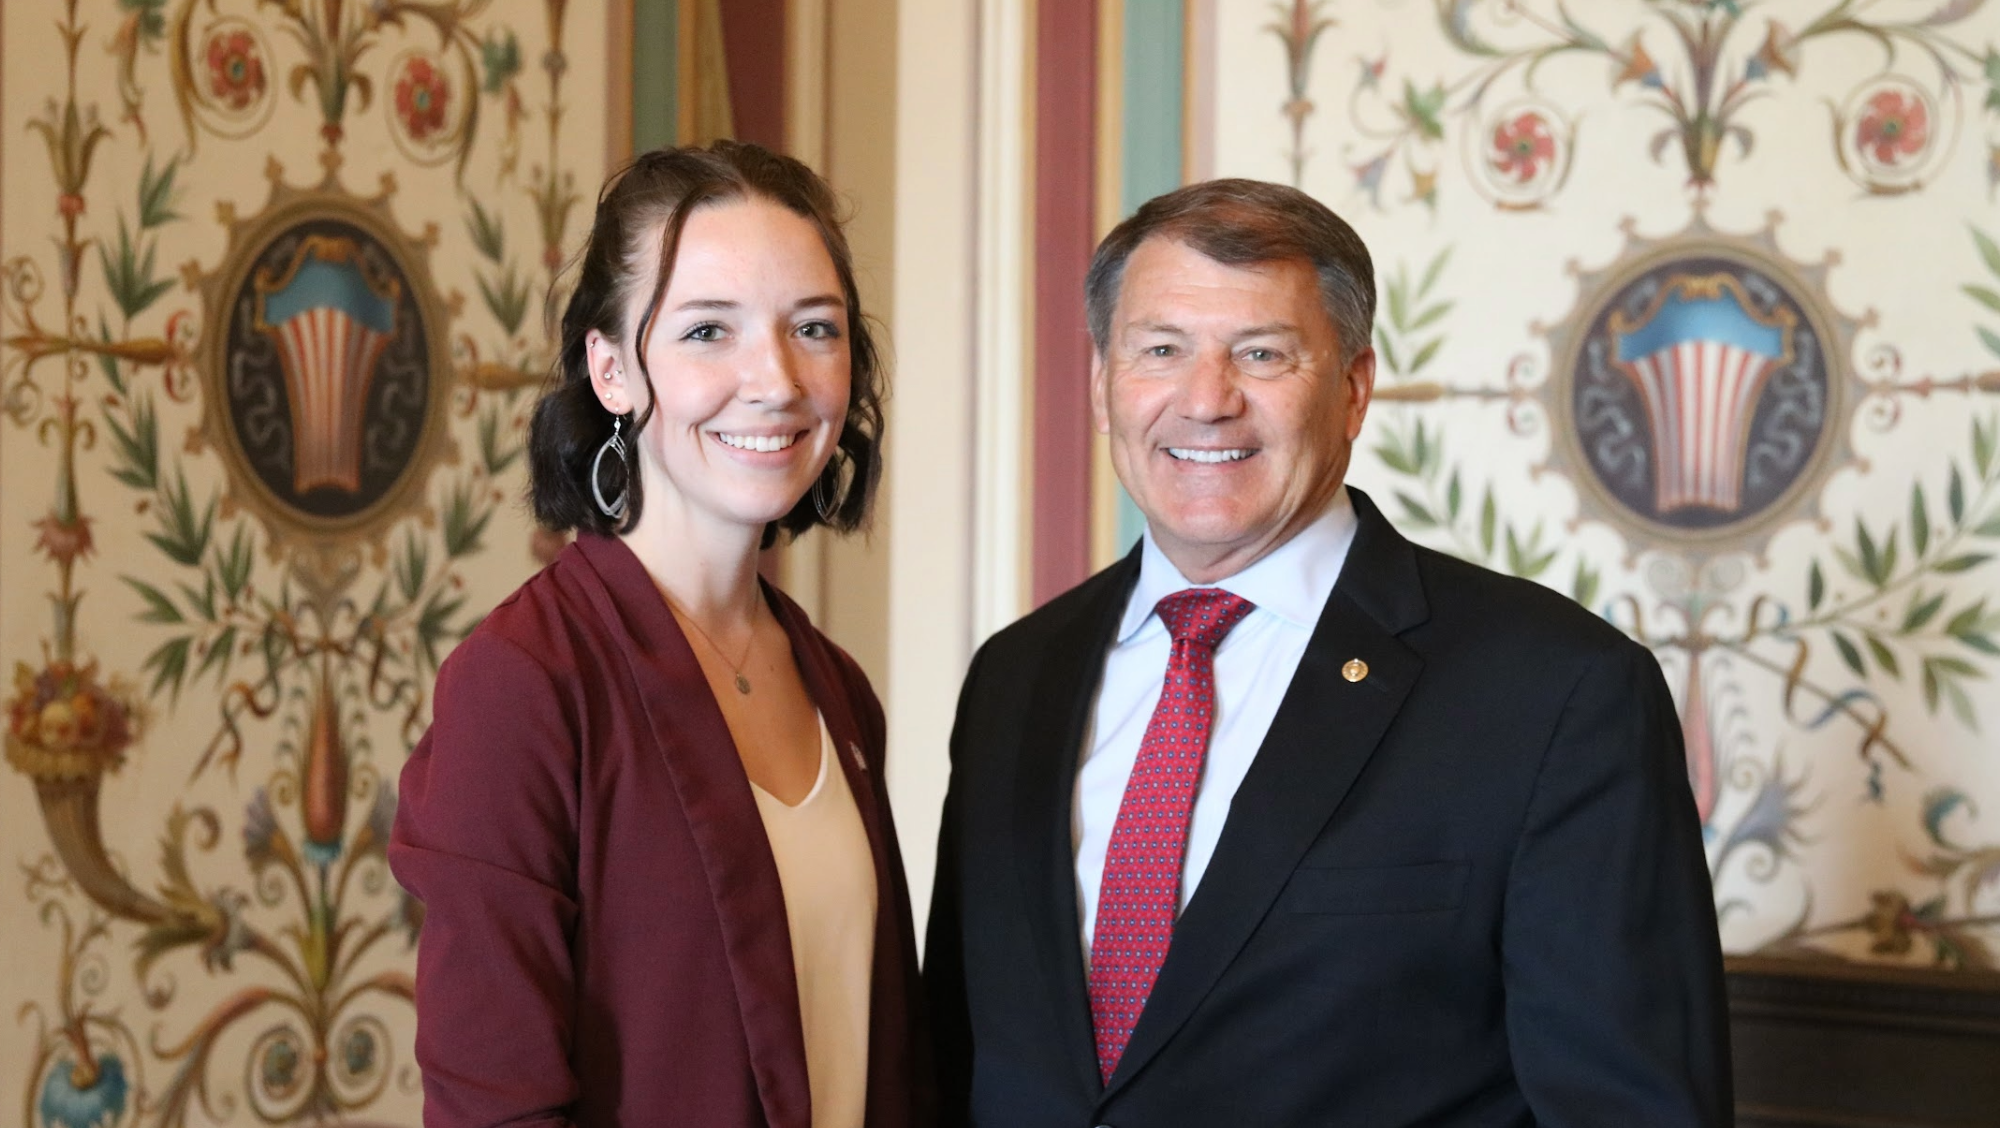 TaylorAnn Wooley with Senator Mike Rounds